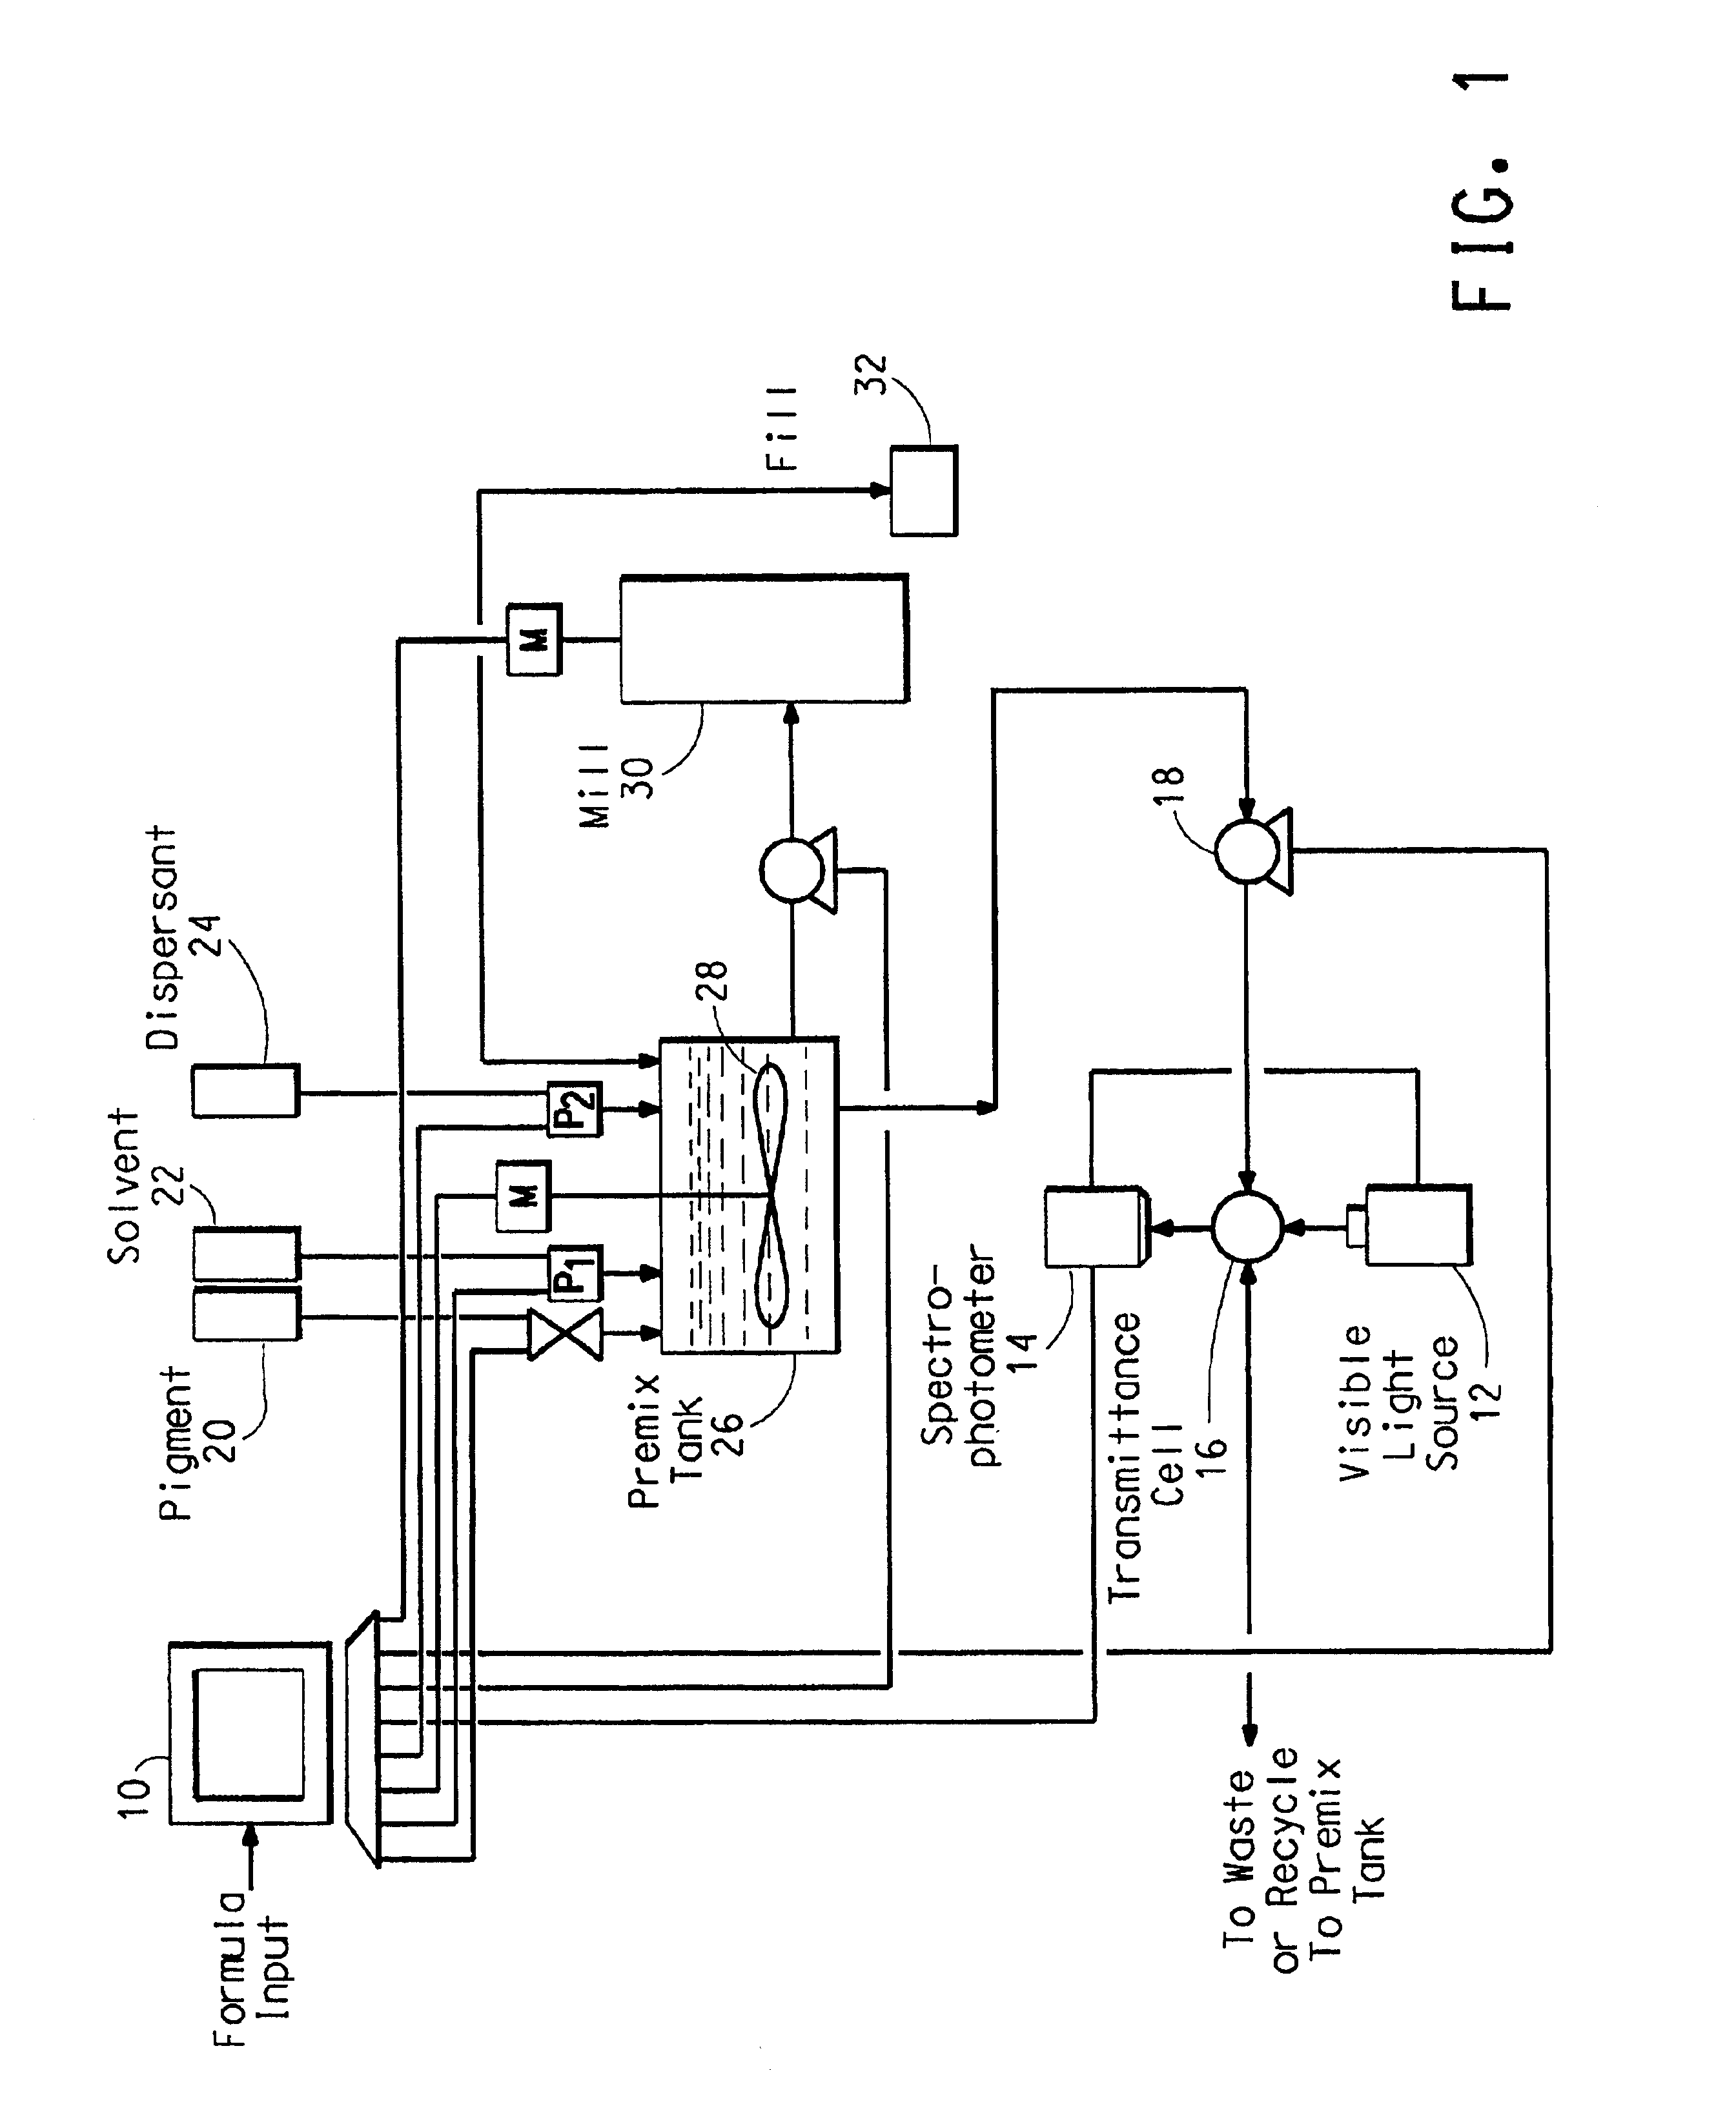 Process for manufacturing pigment dispersions